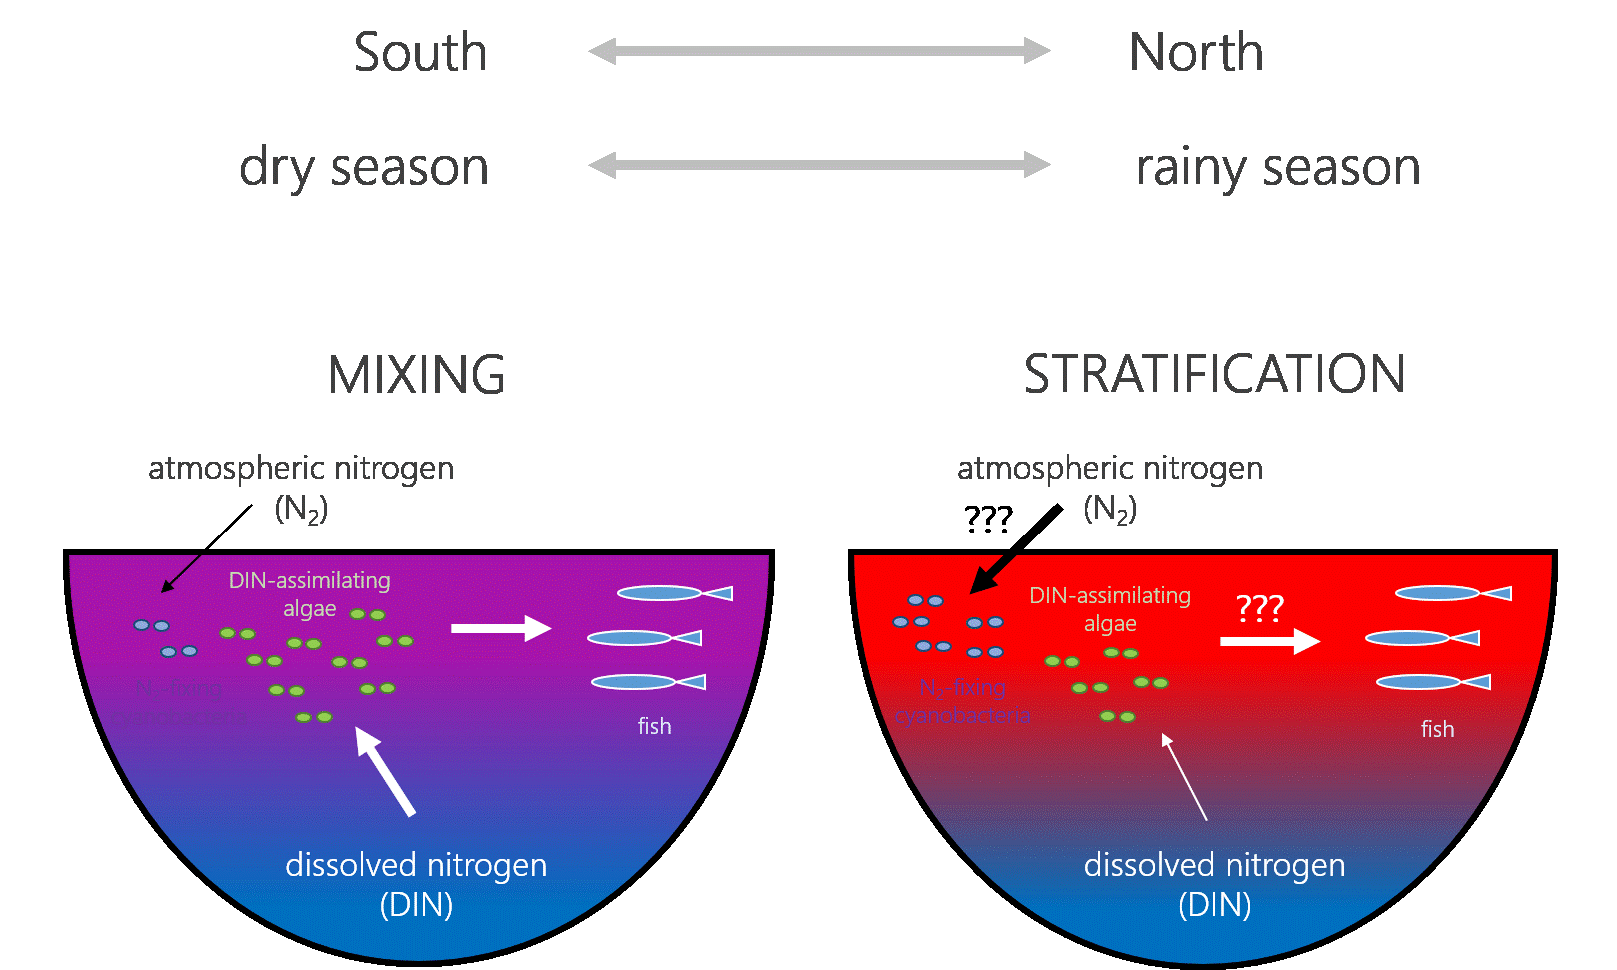 Fig. 1: The fish production of the nitrogen limited Lake Tanganyika is high under mixed conditions, because dissolved inorganic nitrogen (DIN) from deep layers is effectively transported to the surface waters, facilitating the growth of nutritious algae (left). In contrast, strong stratification slows down the vertical DIN transport, conditions under which nitrogen-fixing cyanobacteria may thrive. However, it is unknown whether biological nitrogen fixation may compensate for the reduced DIN transport into the surface zone and maintain an equally productive algal and bacterial community as base of the food web.